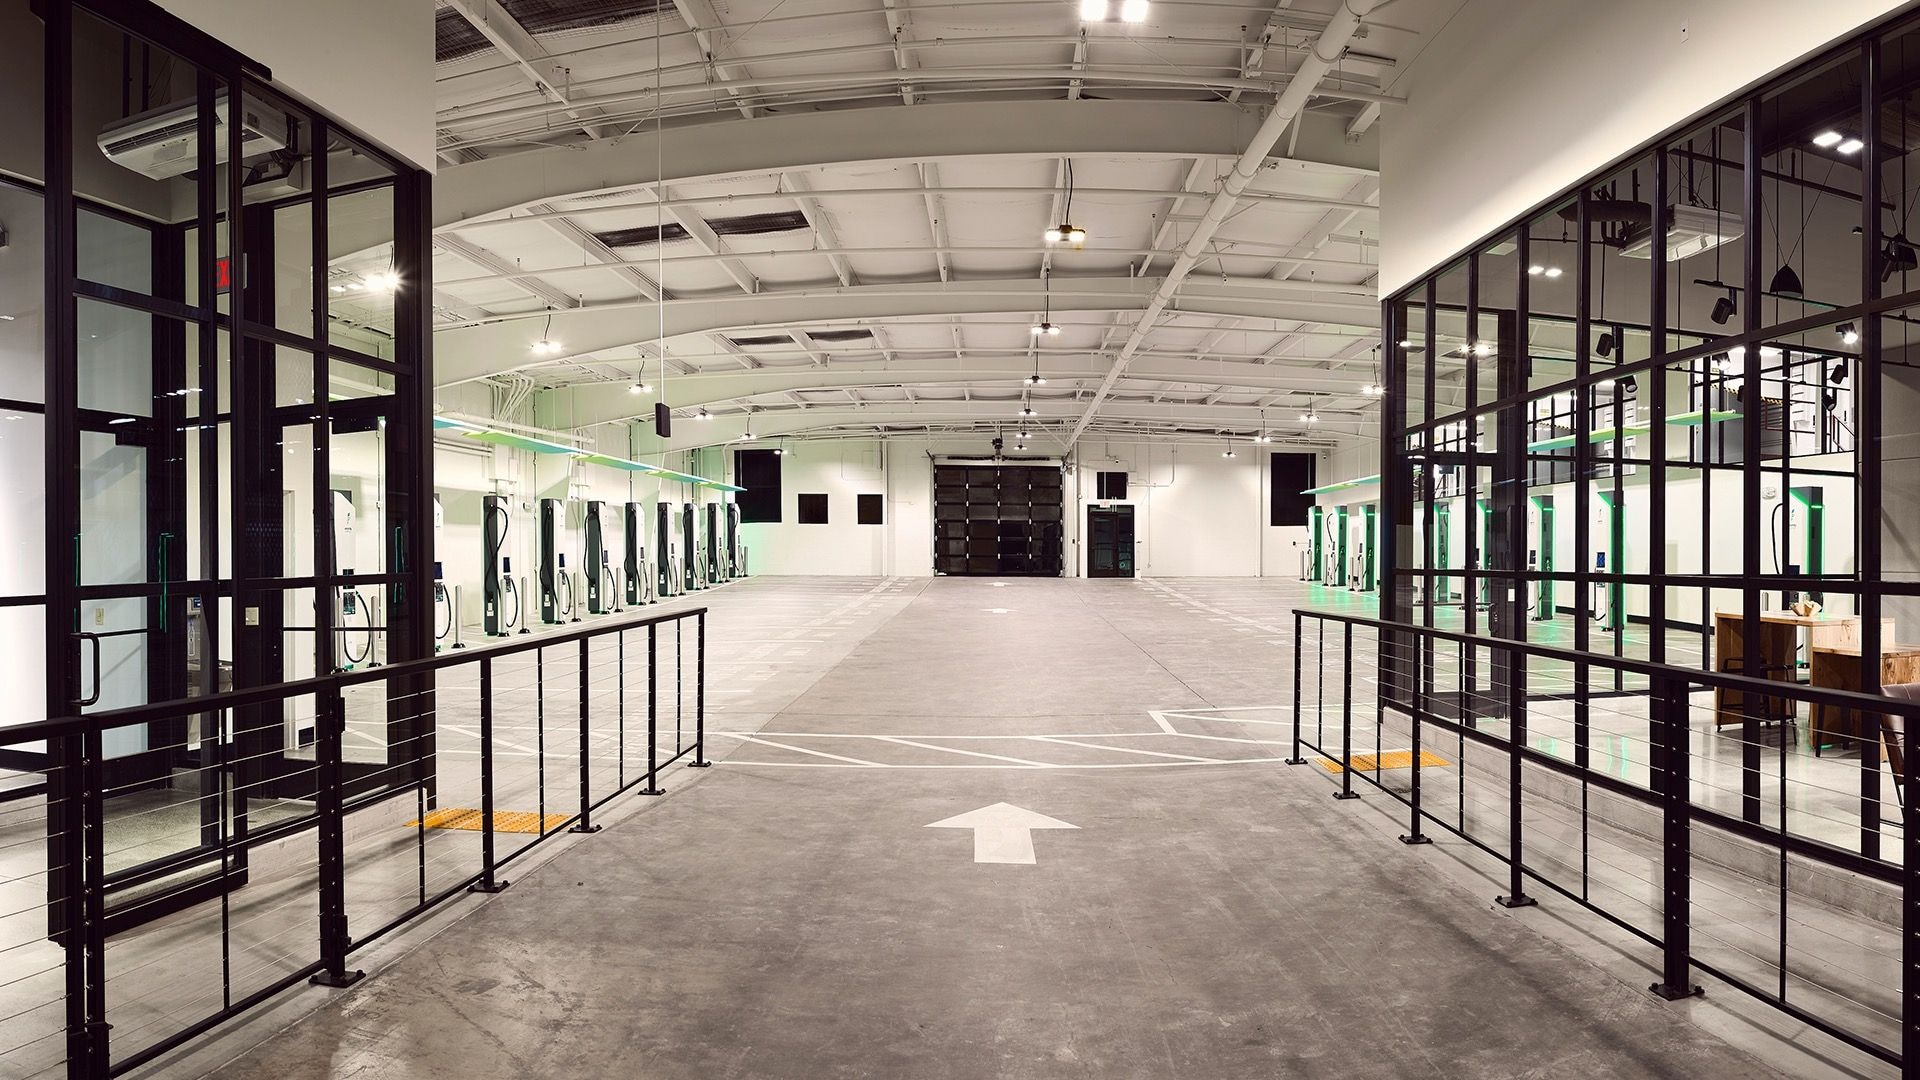 First Electrify America indoor charging station opens in San Francisco